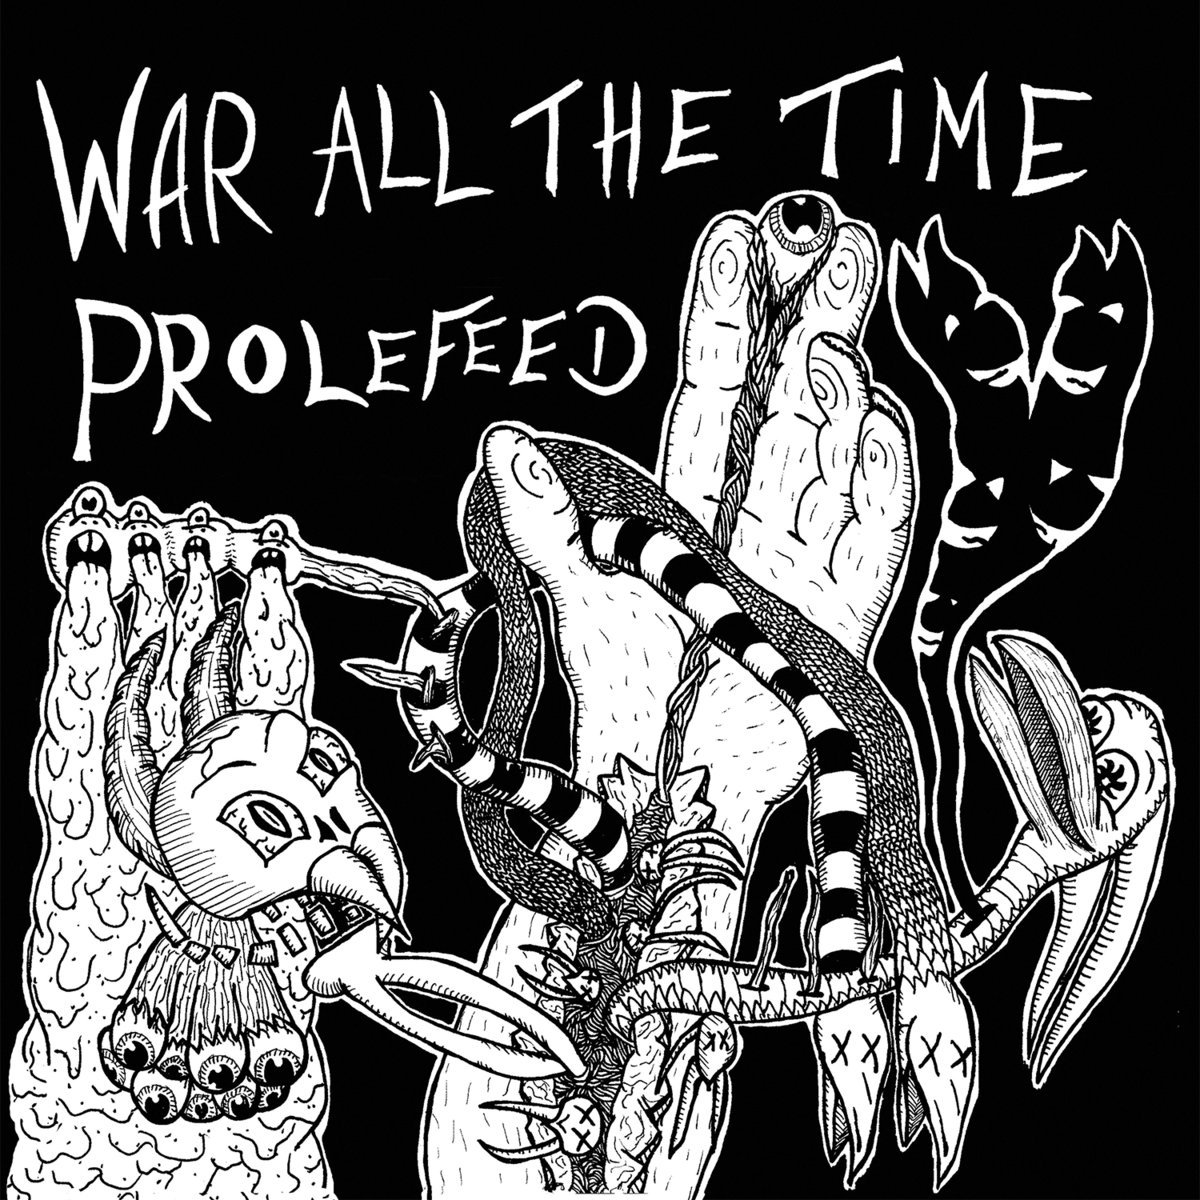 PROLEFEED - War All The Time / Prolefeed cover 